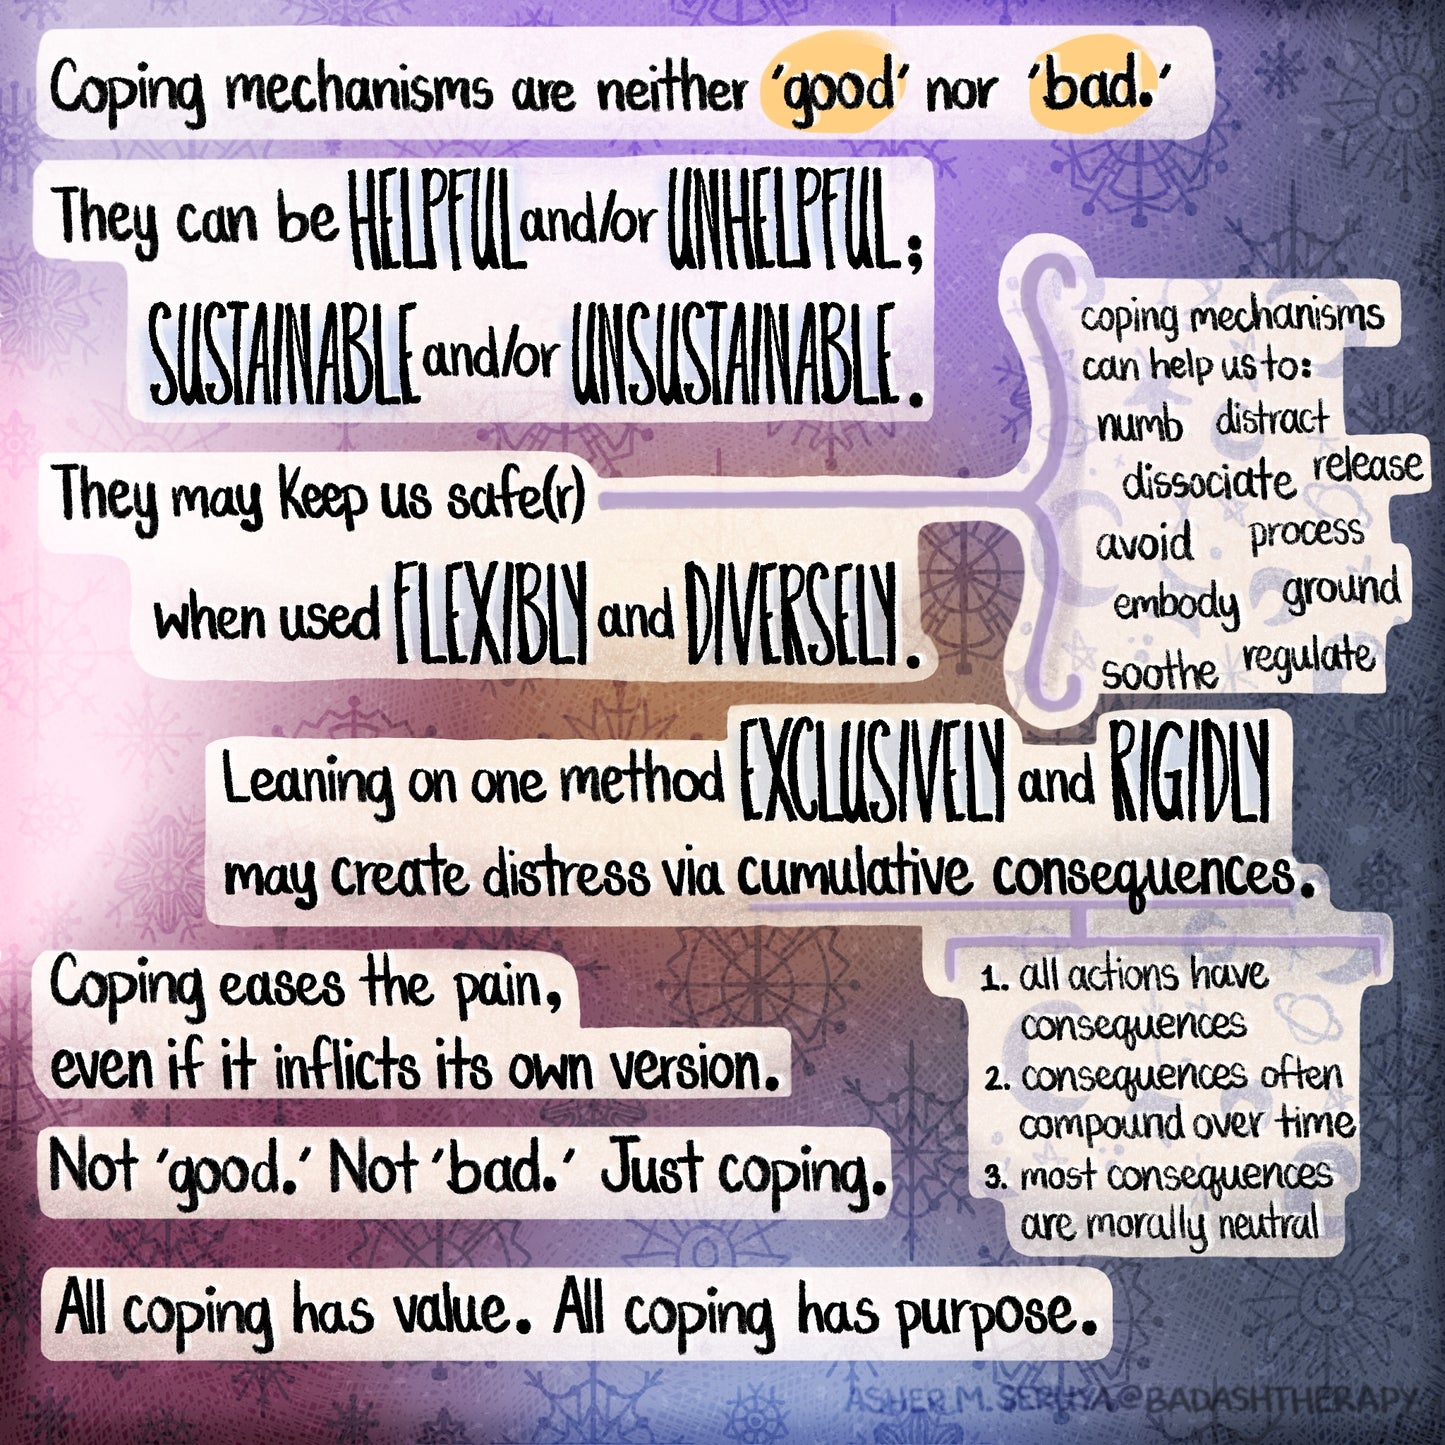 Navigating Coping Mechanisms - Illustrated Infographic